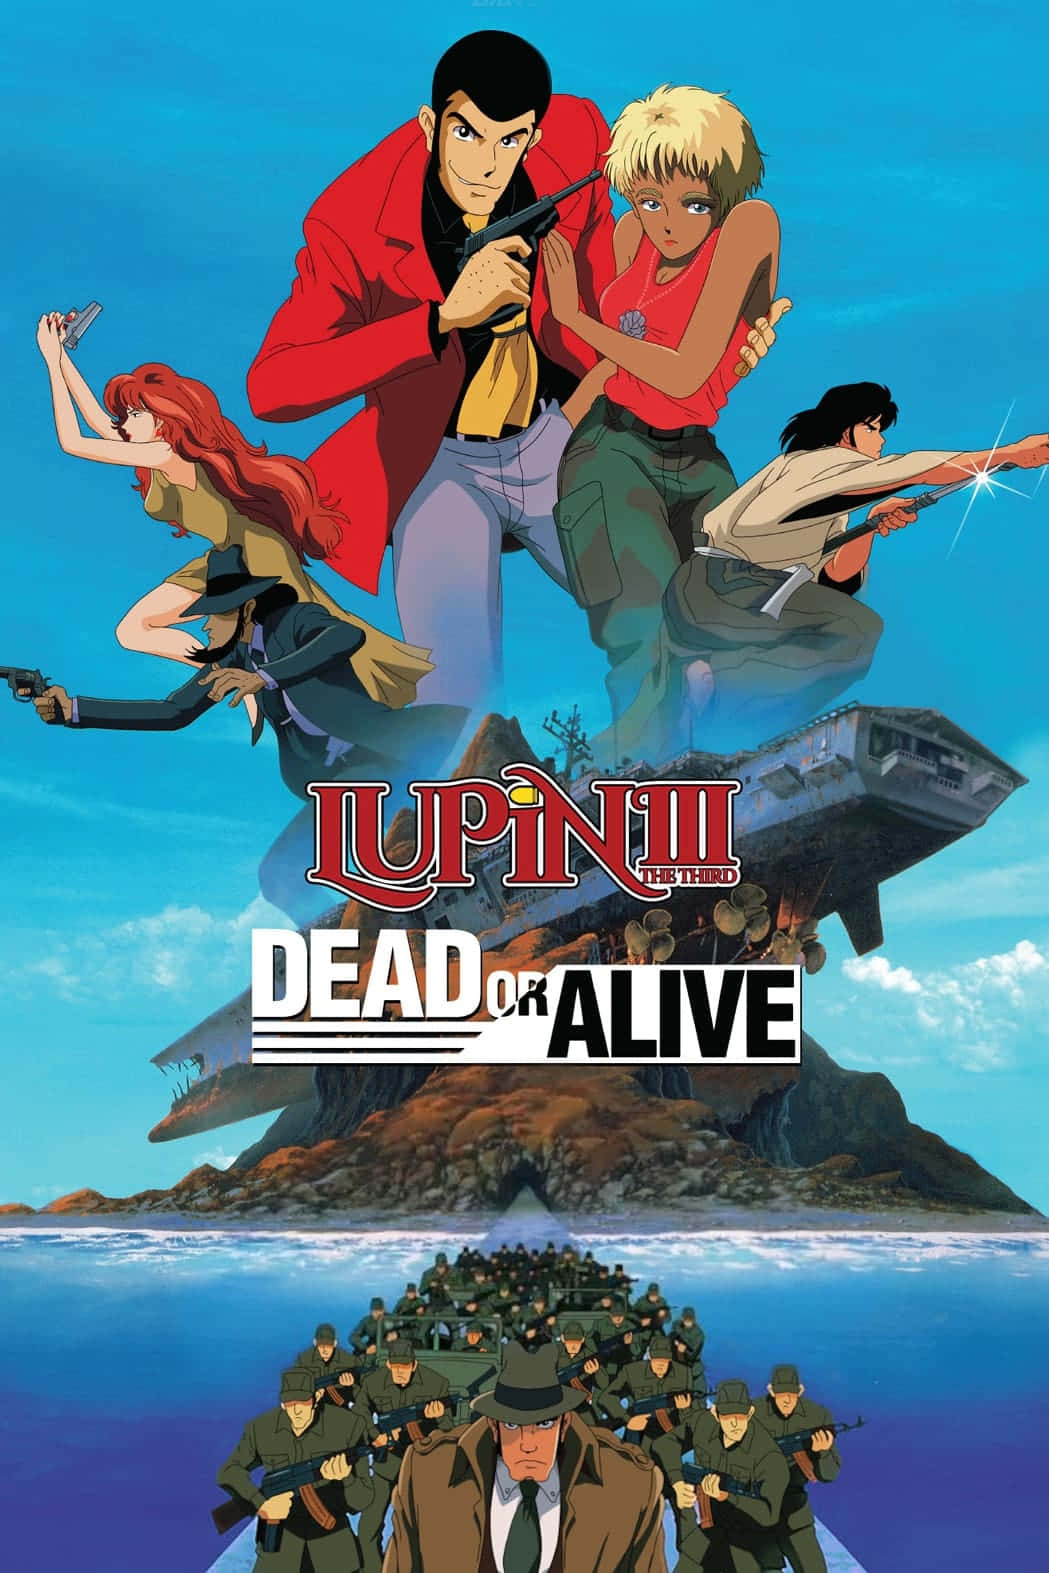 Lupin III and his crew in action Wallpaper